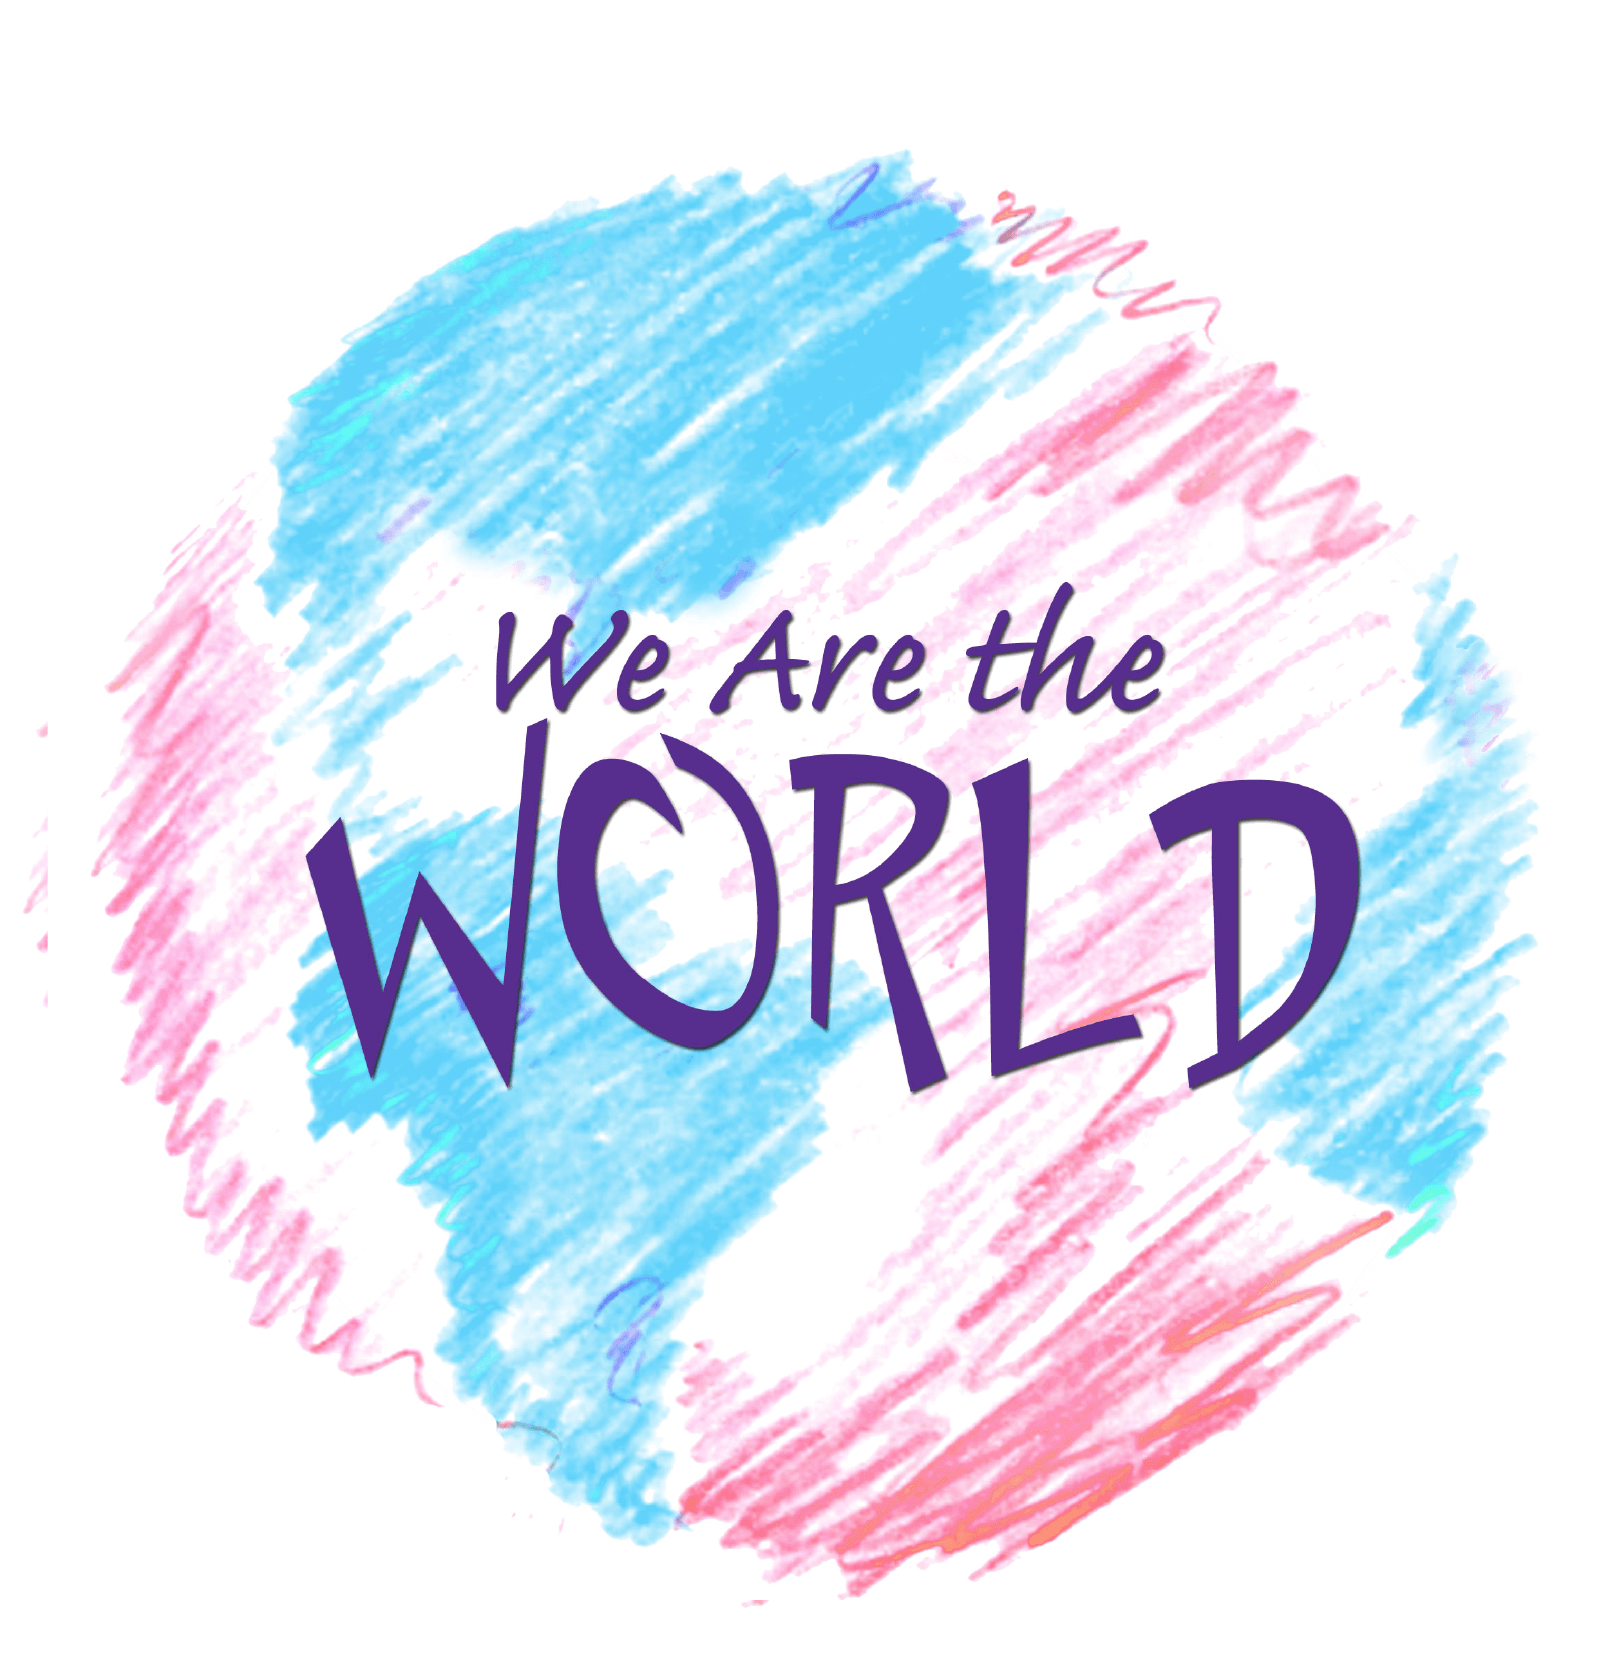 We Are the World Logo - We Are The World. St. Mary's School (I.C.S.E.)